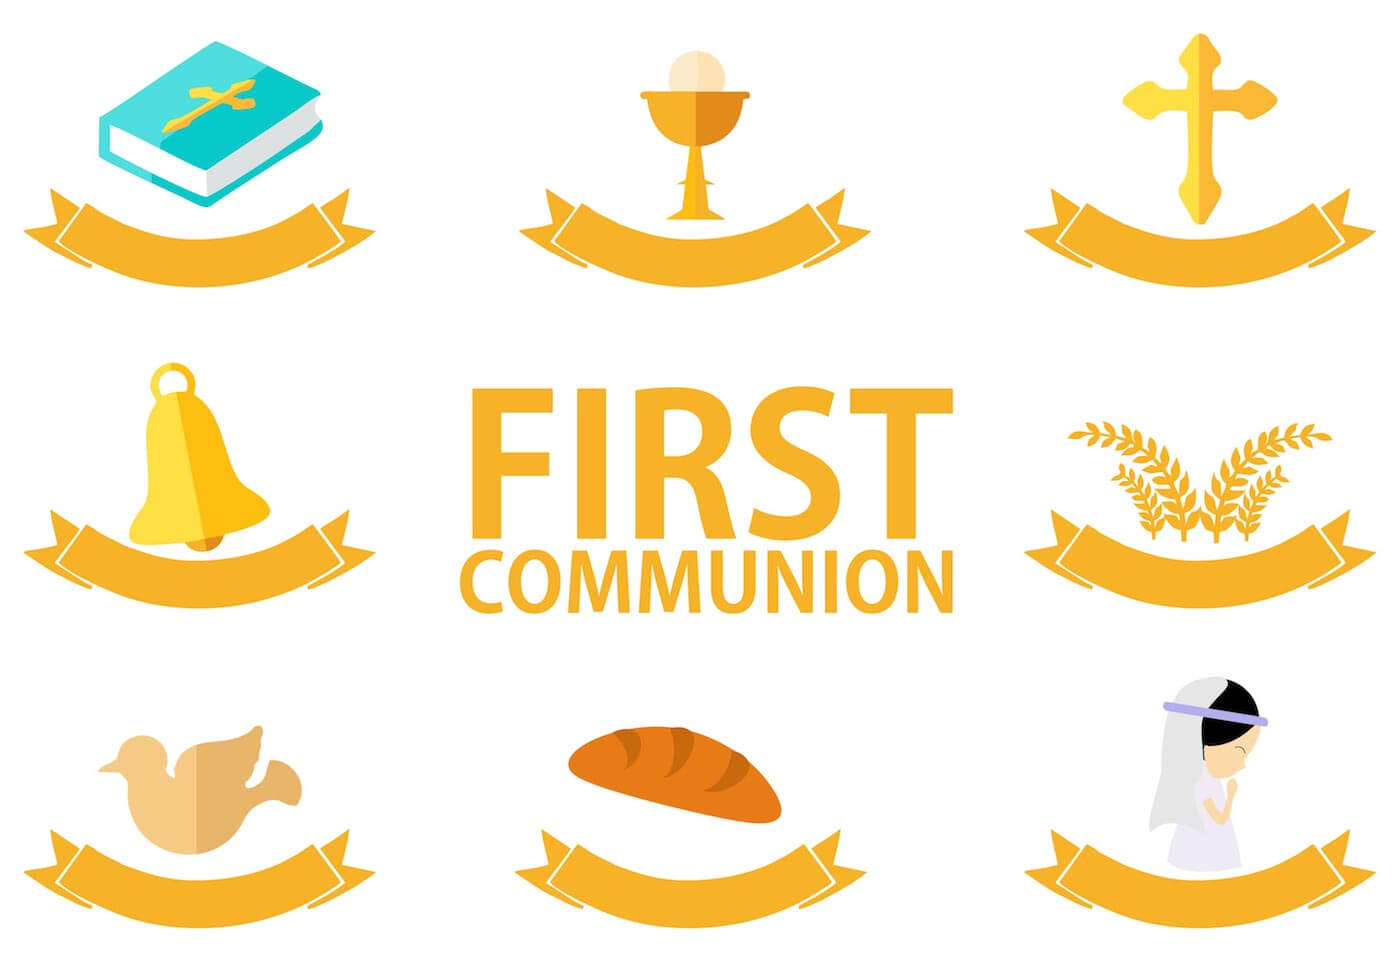 First Communion Template Free Vector Art – (25 Free Downloads) Intended For First Communion Banner Templates